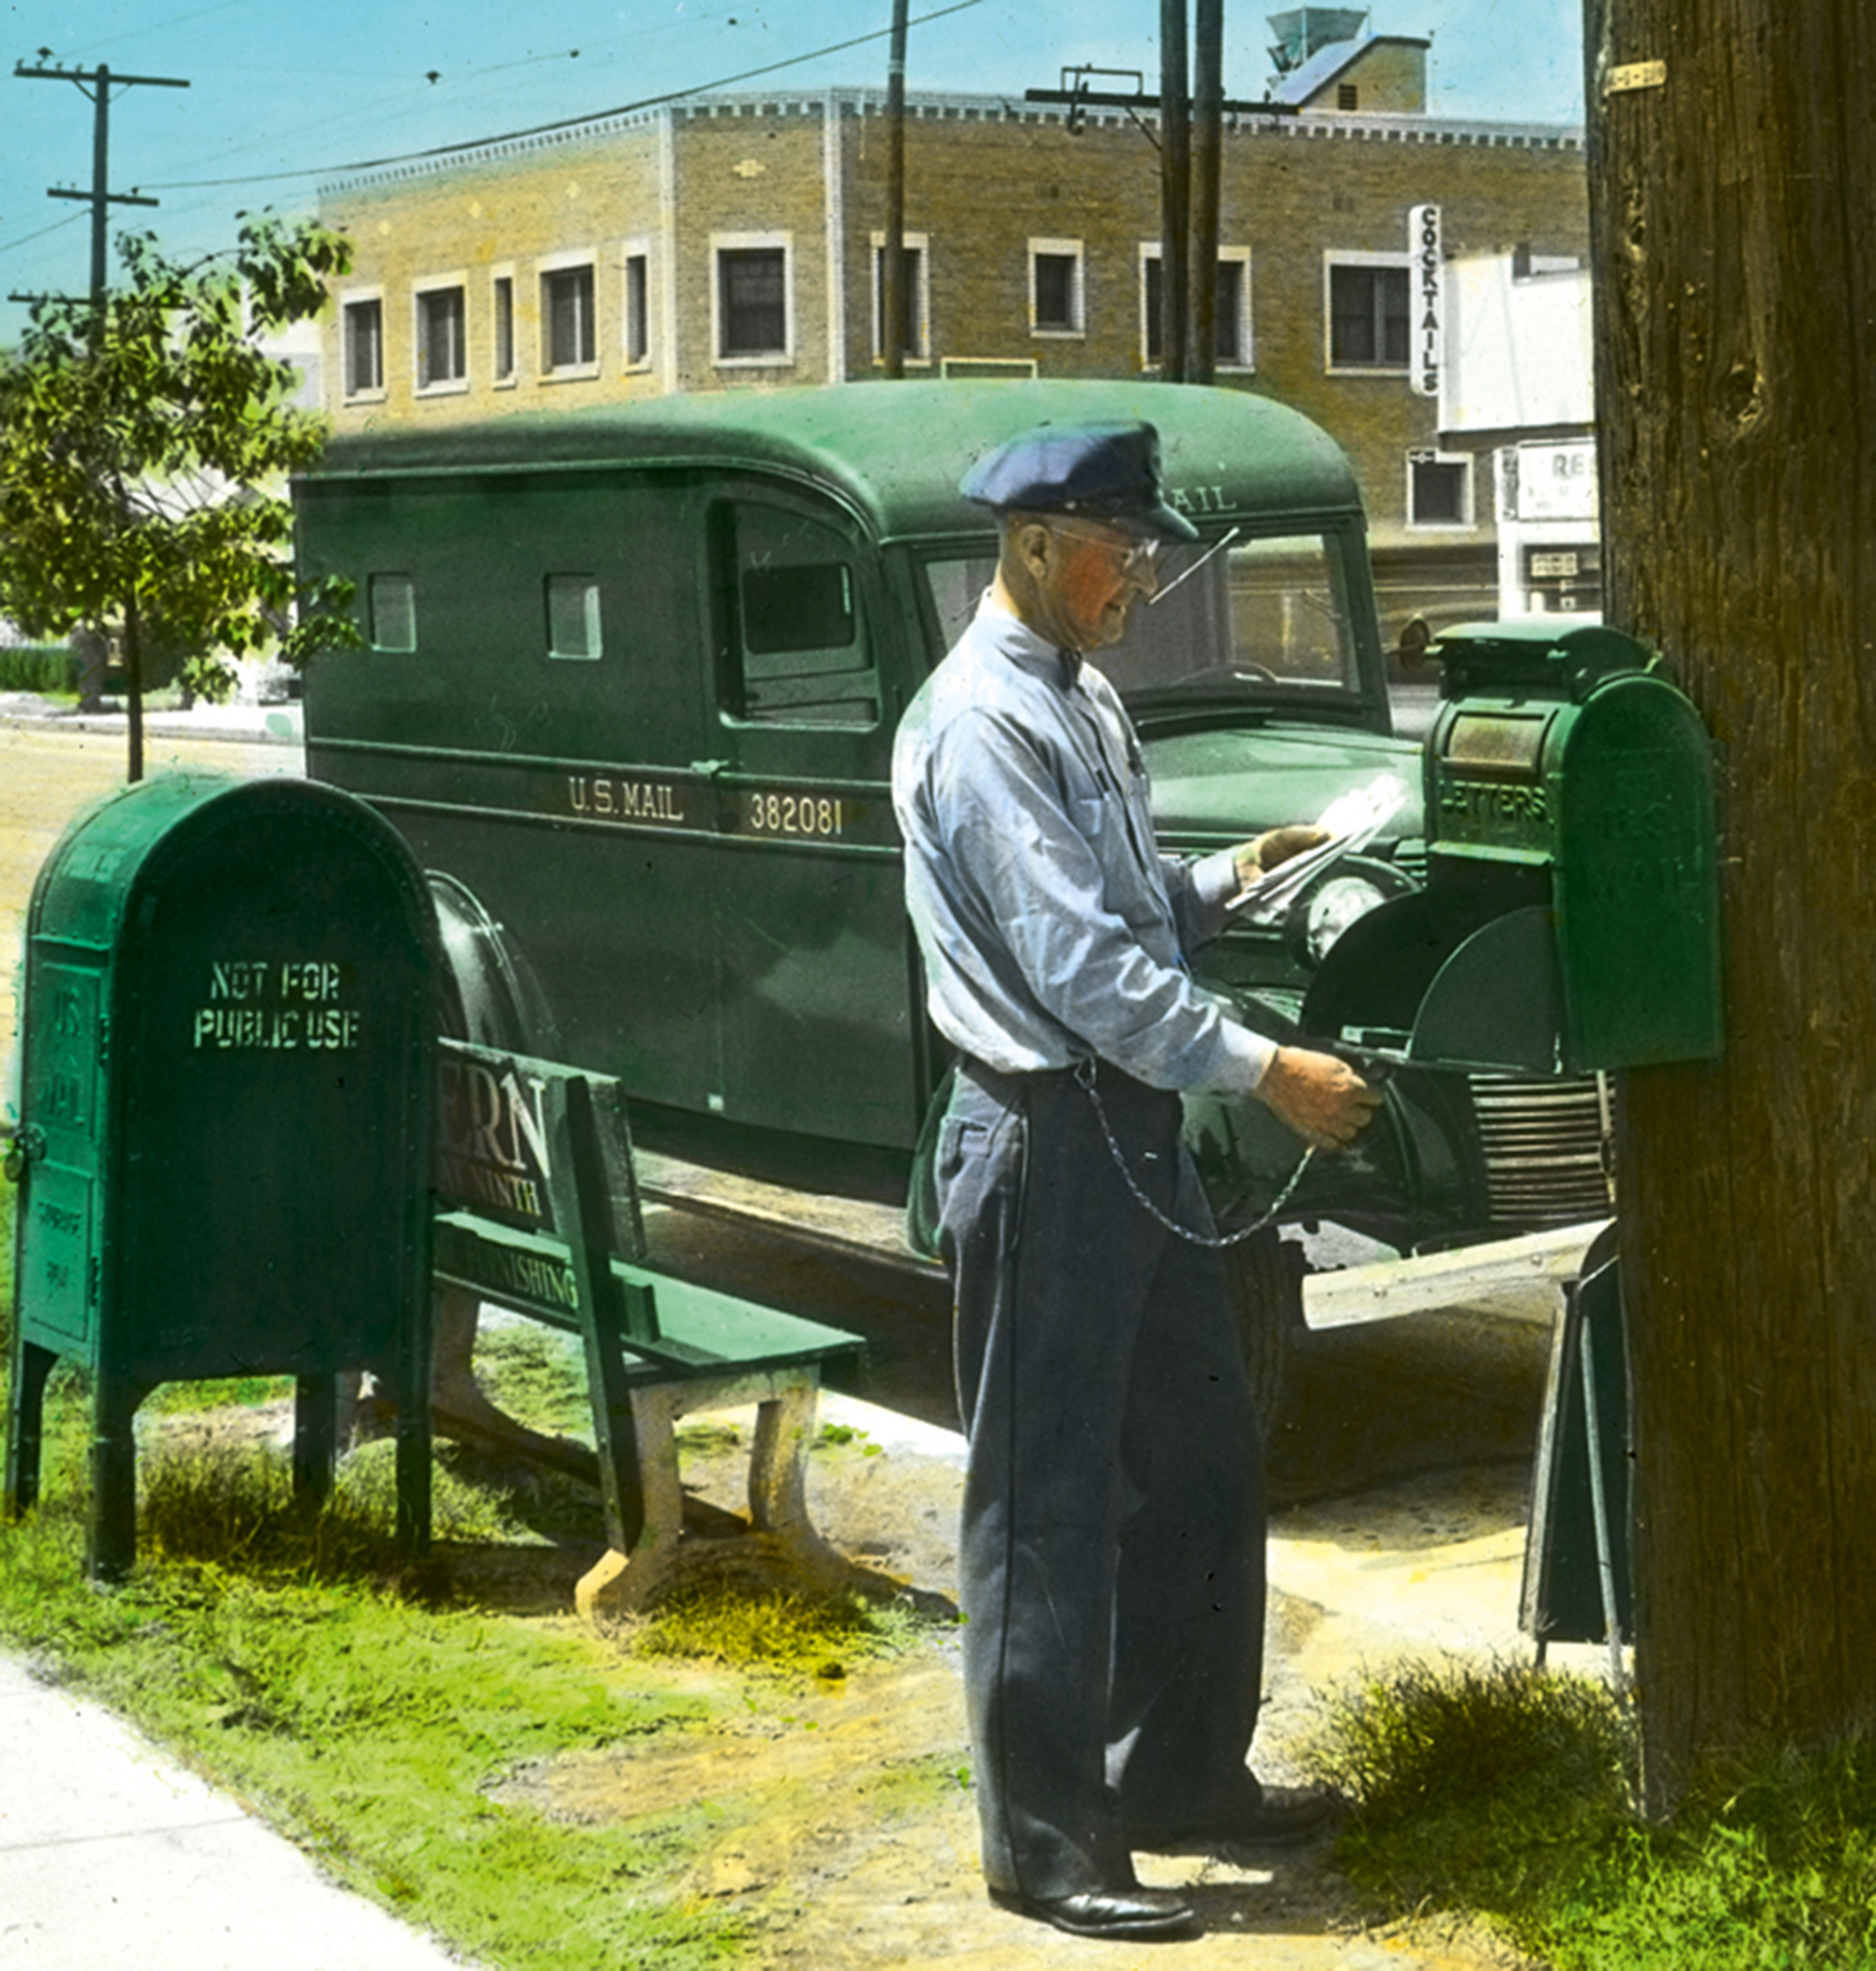 A letter carrier unlocks a mailbox mounted to a telephone pole, ca. 1947.